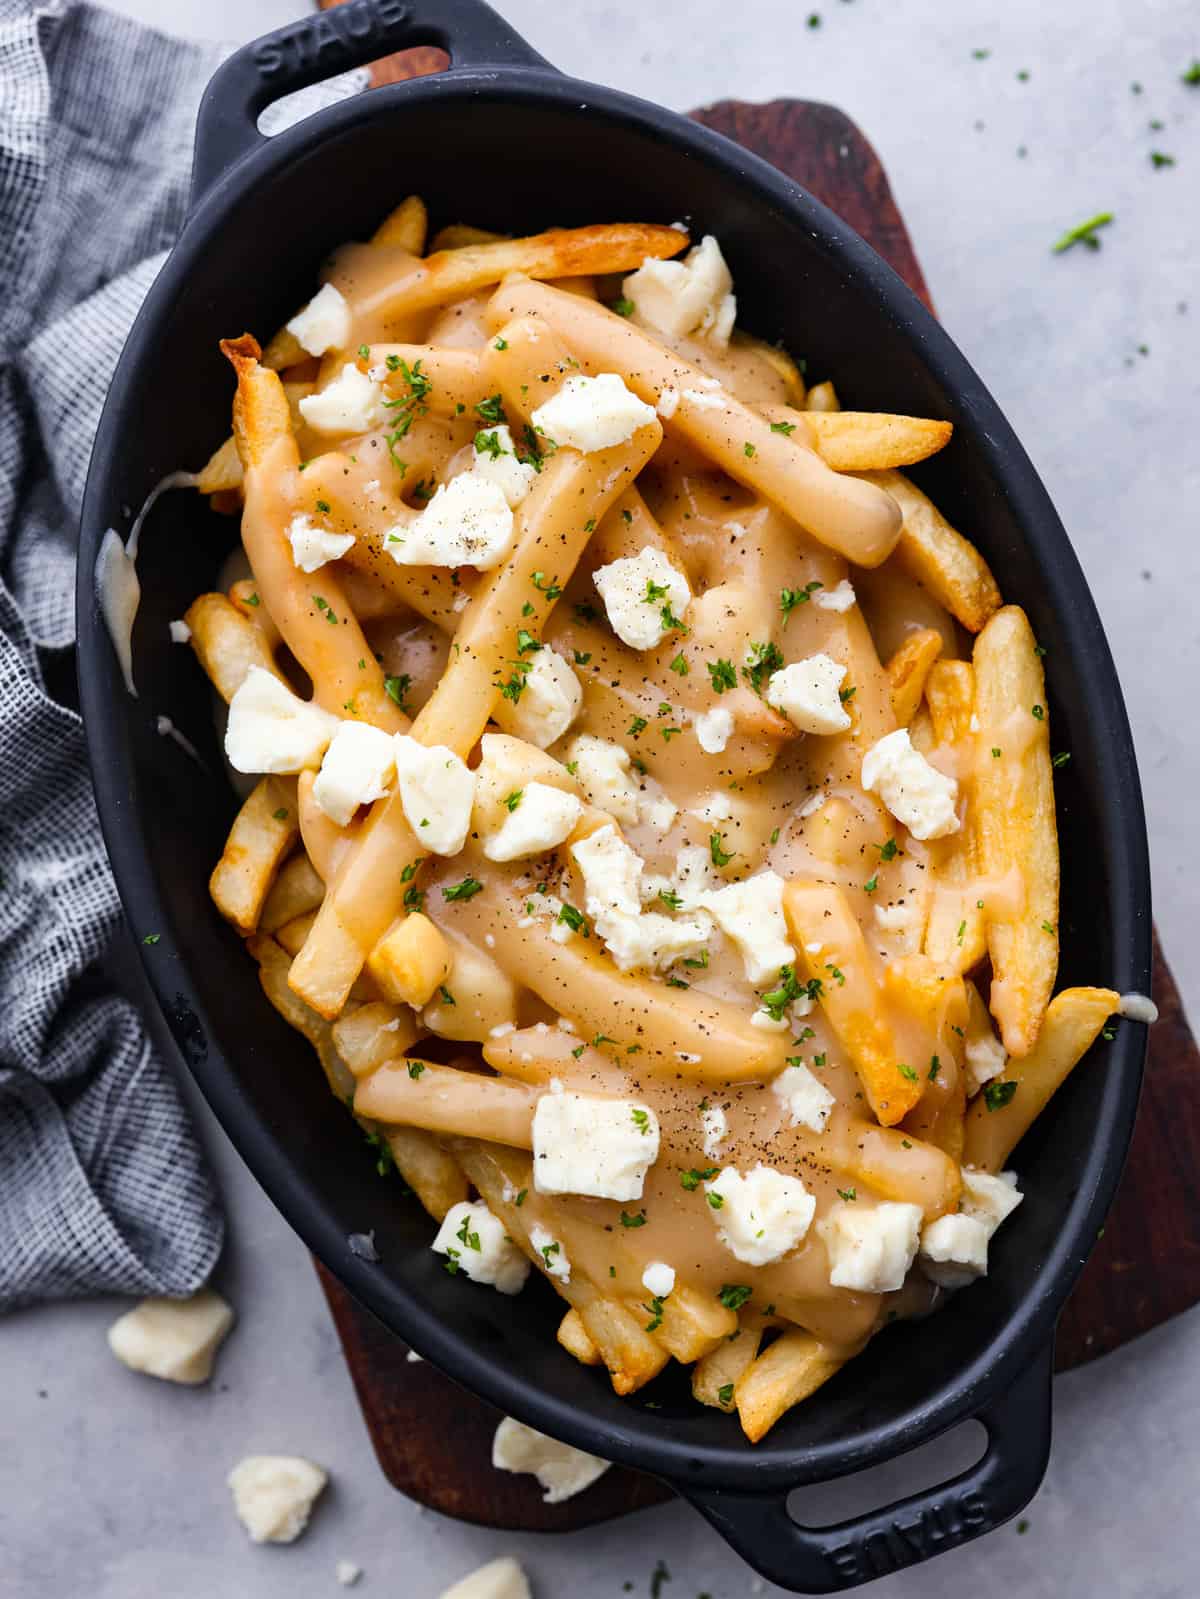 Poutine Recipe - The Forked Spoon